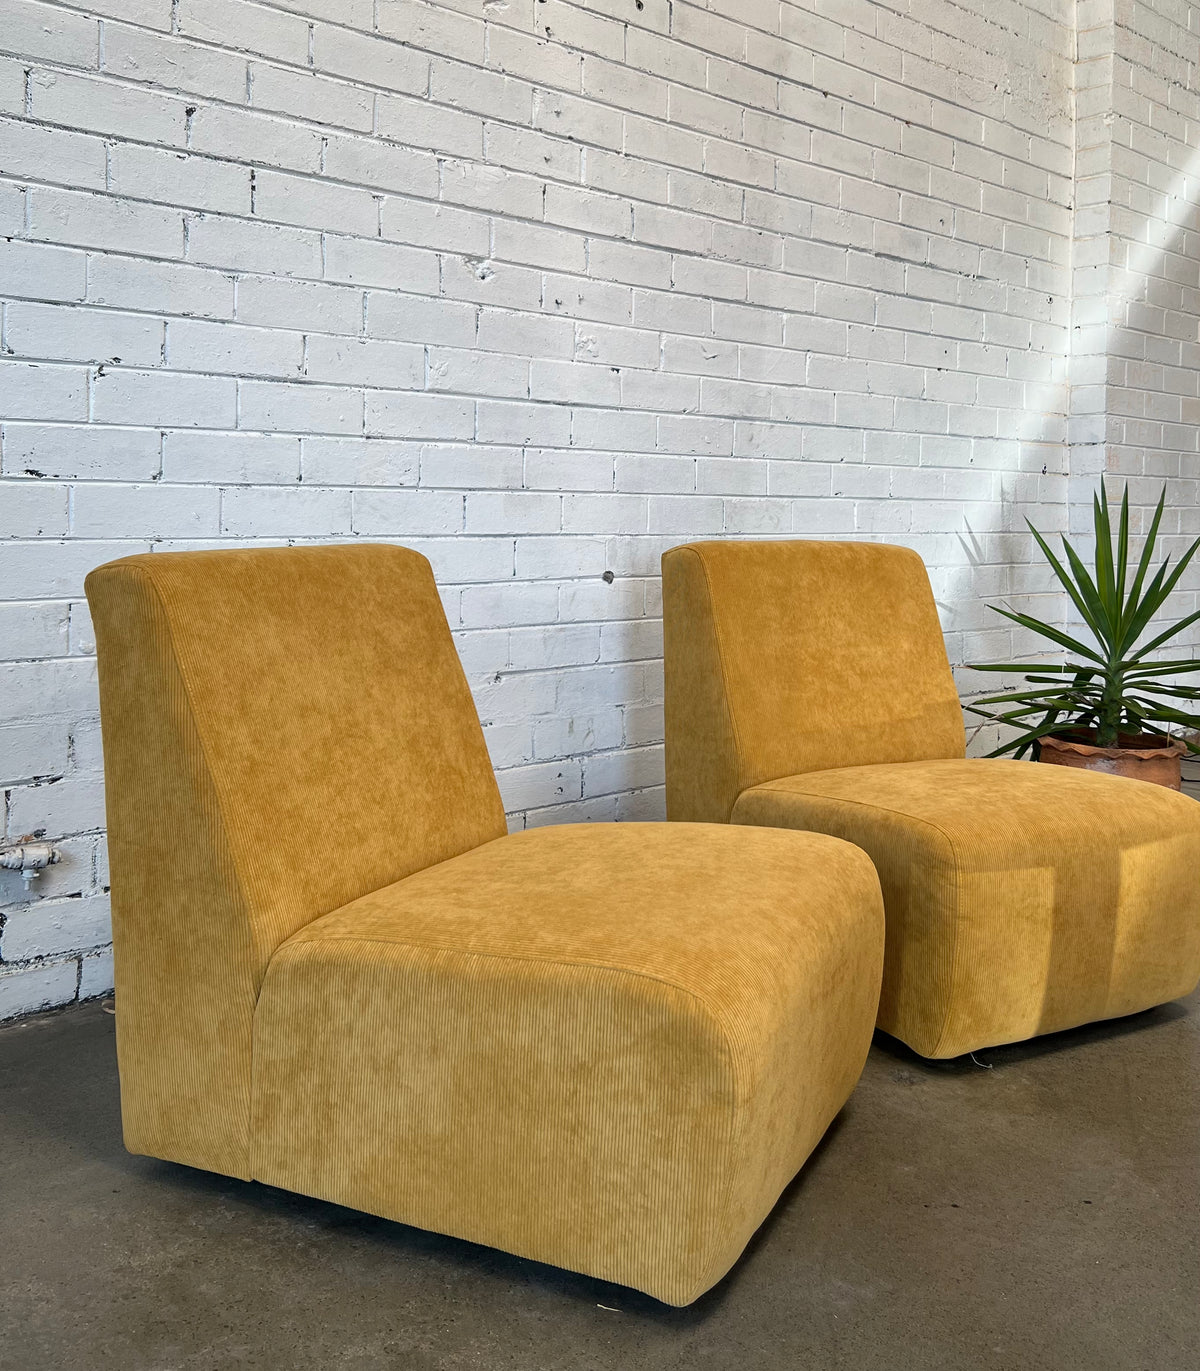 Modular Lounge Chair in Mustard Corduroy - Two Available